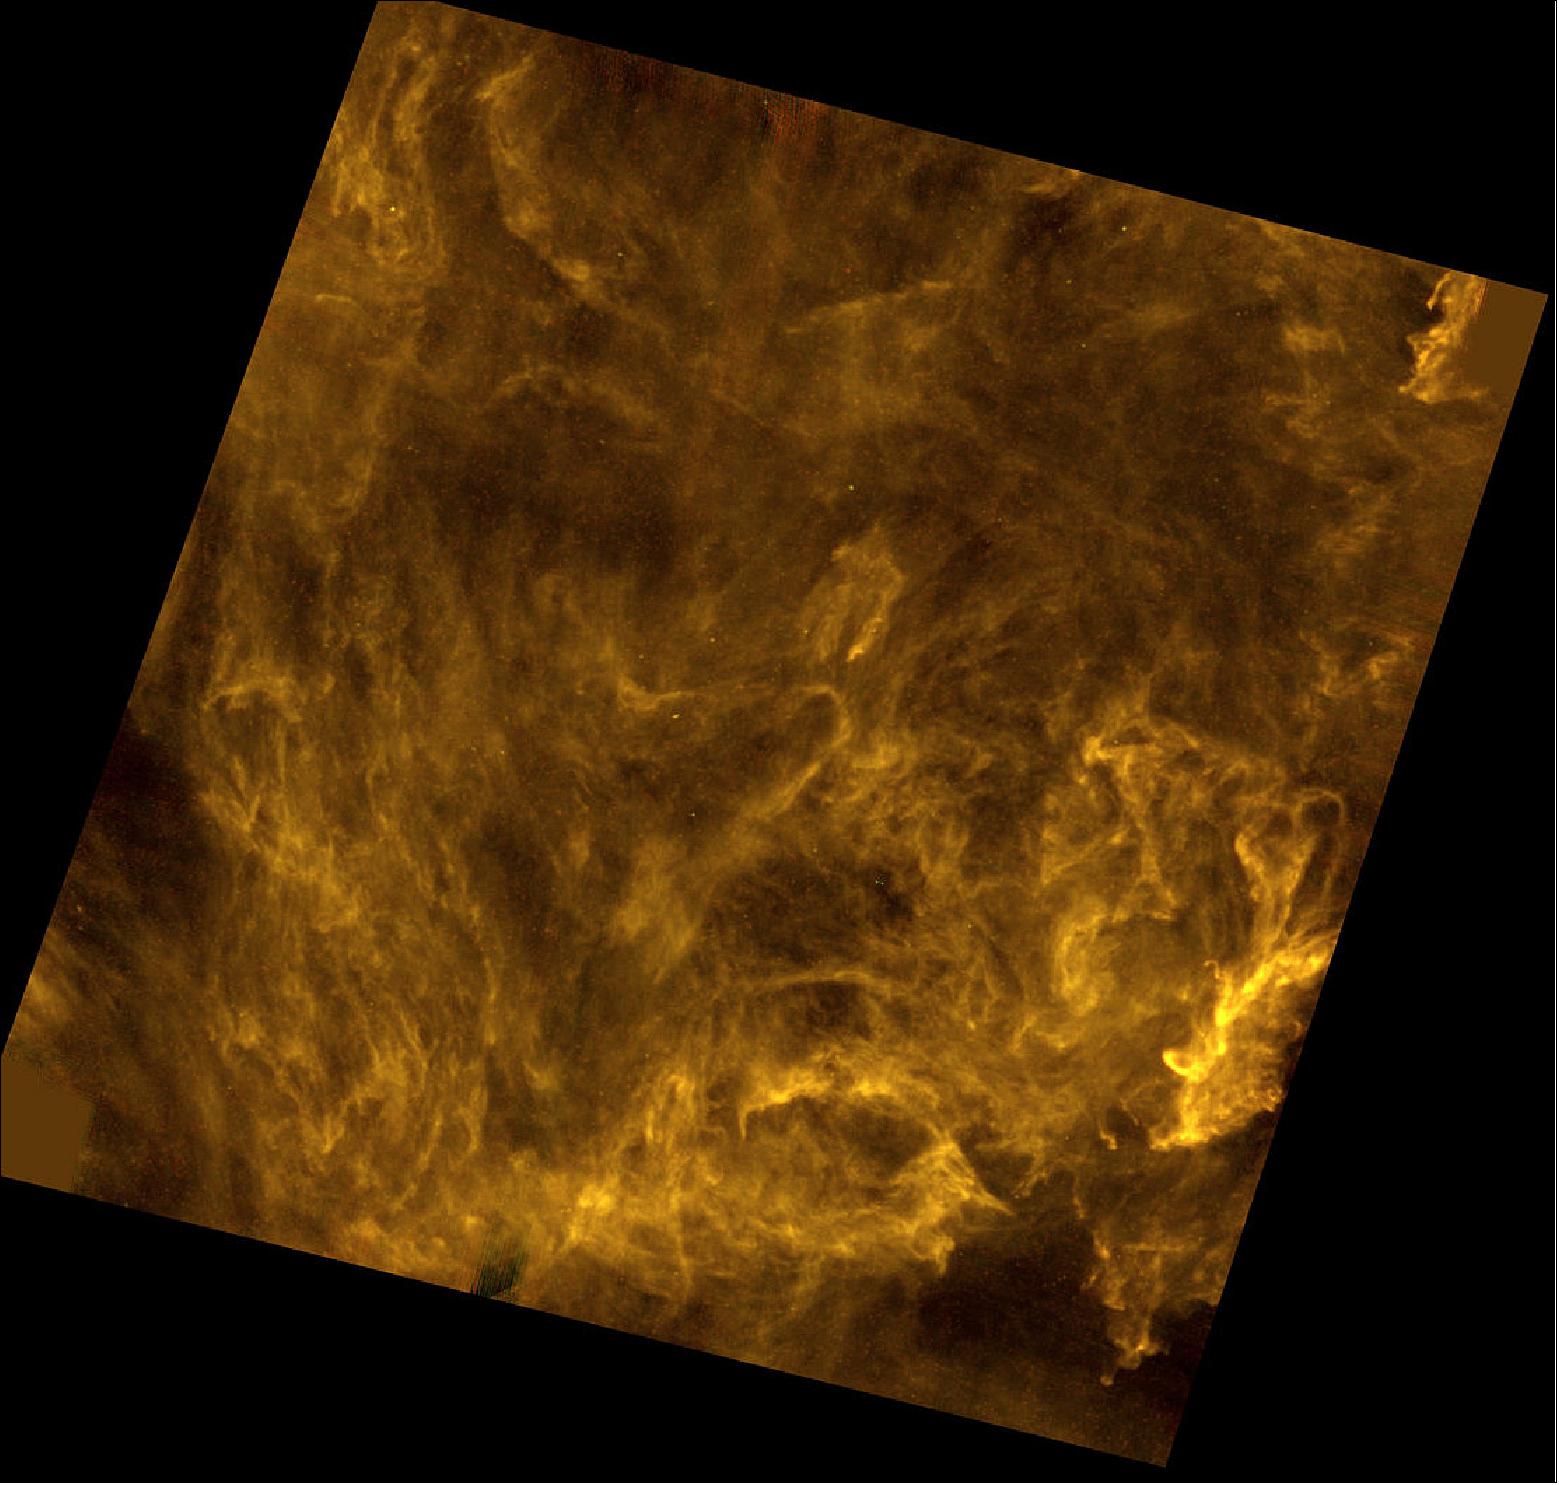 Figure 38: This region is in Polaris, 490 light-years away. It was imaged by ESA’s HSO (Herschel Space Observatory) in 2011; a color composite is presented here (image credit: ESA and the SPIRE & PACS consortia, Ph. André (CEA Saclay) for the Gould’s Belt Survey Key Program Consortium, and A. Abergel (IAS Orsay) for the Evolution of Interstellar Dust Key Program Consortium)